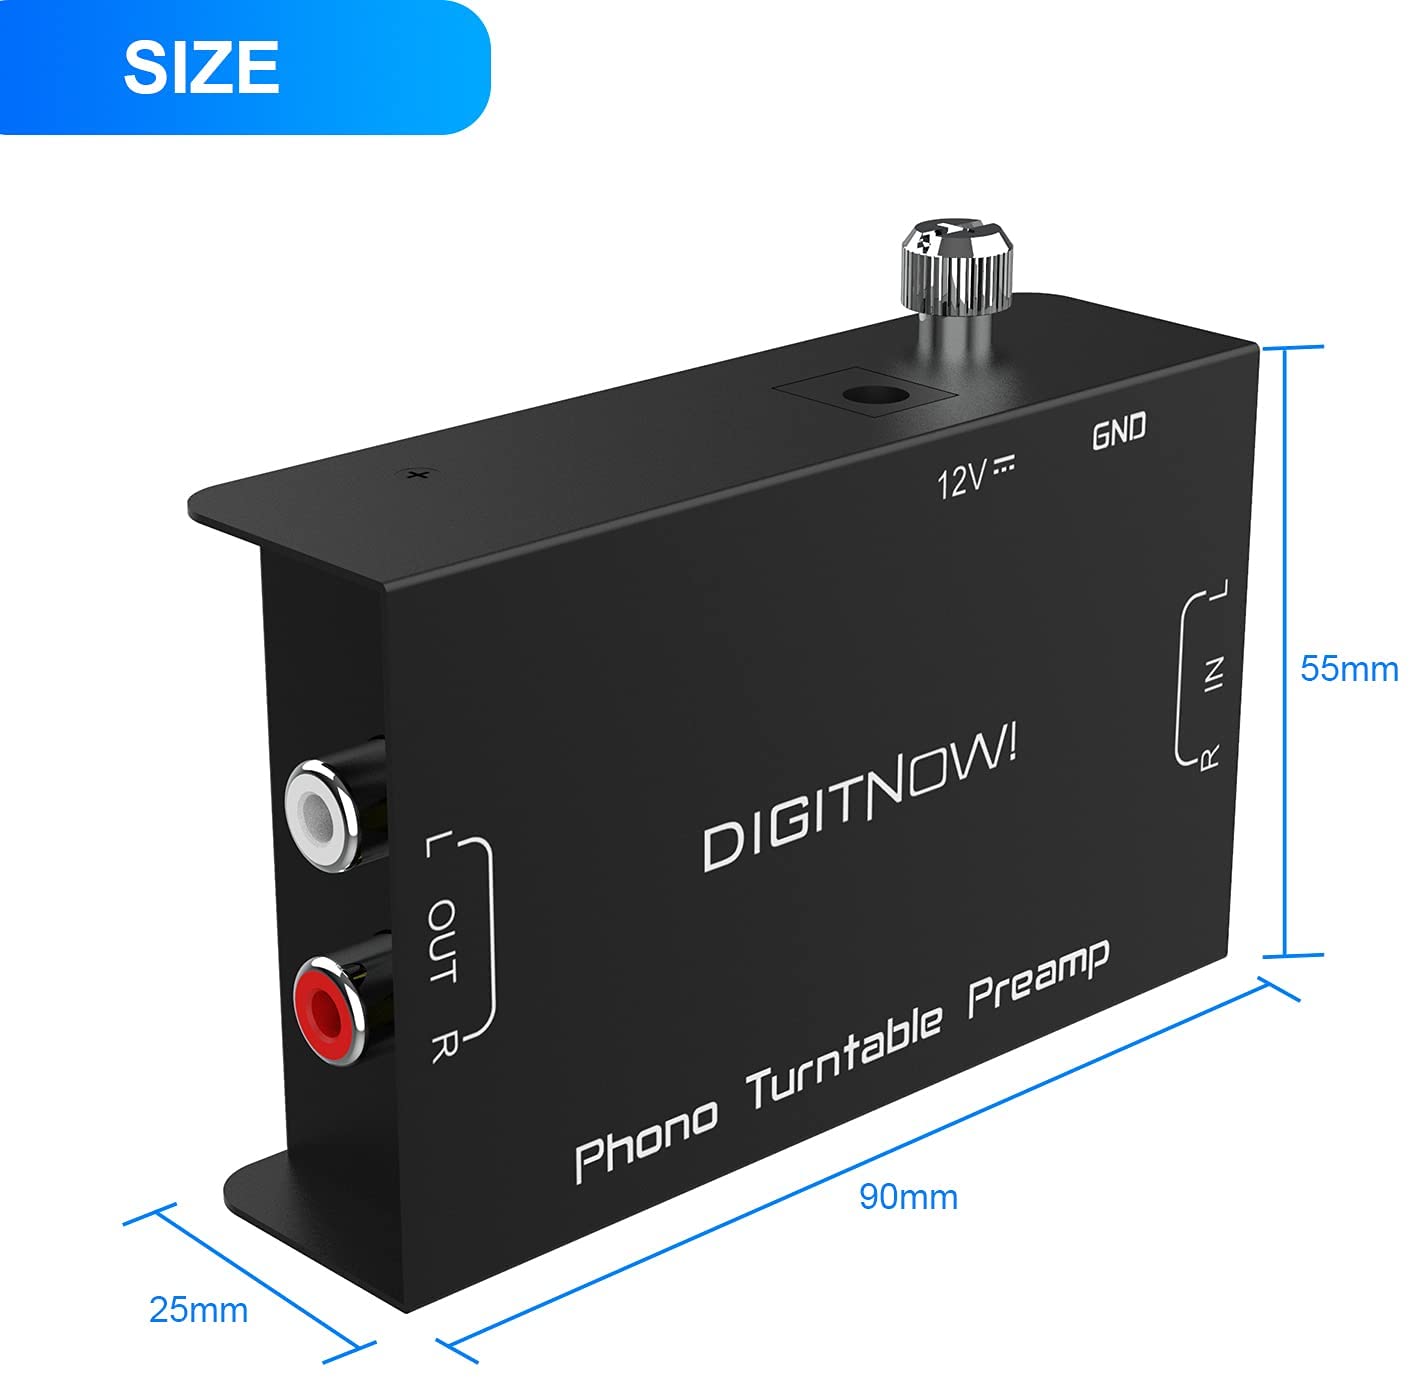 DIGITNOW Photo Turntable Preamp,Mini Electronic Audio Stereo Phonograph Preamplifier with RCA Input, RCA Output & Low Noise Operation, Power Adapter Included( PP999)